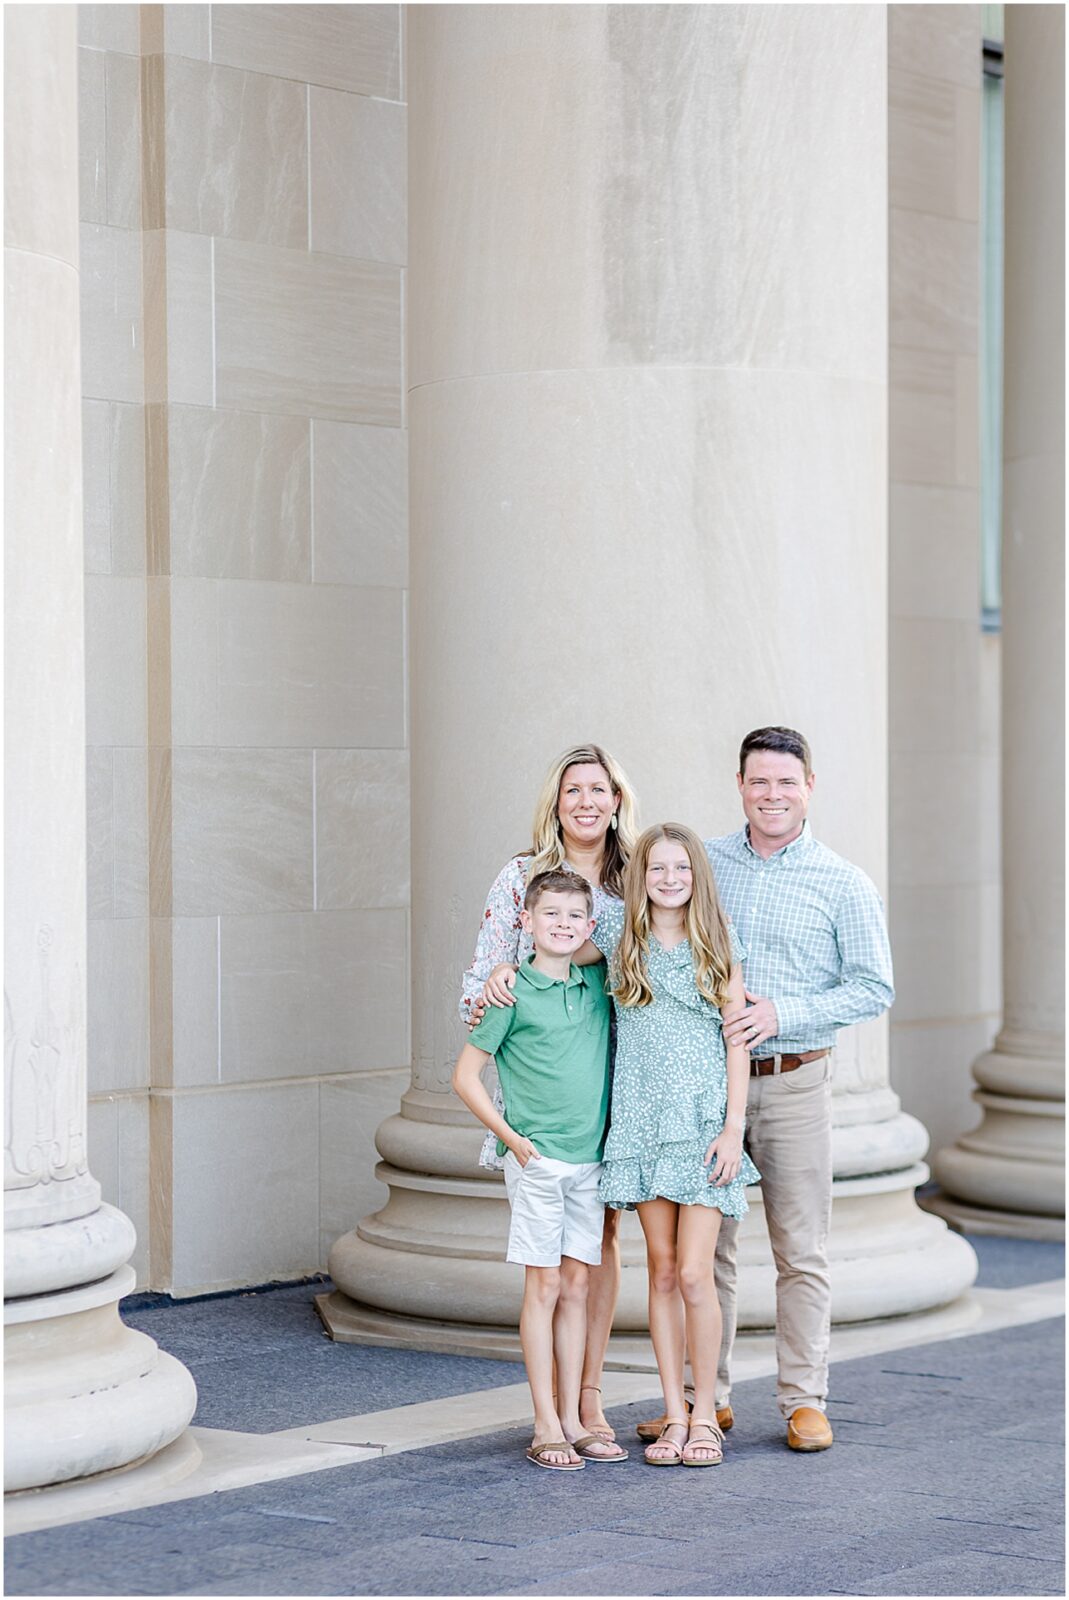 cute family - Kansas City Family Portrait Poses & Outfits Inspiration - multi generational family portraits - Overland Park based photographer - summer family photos outdoor